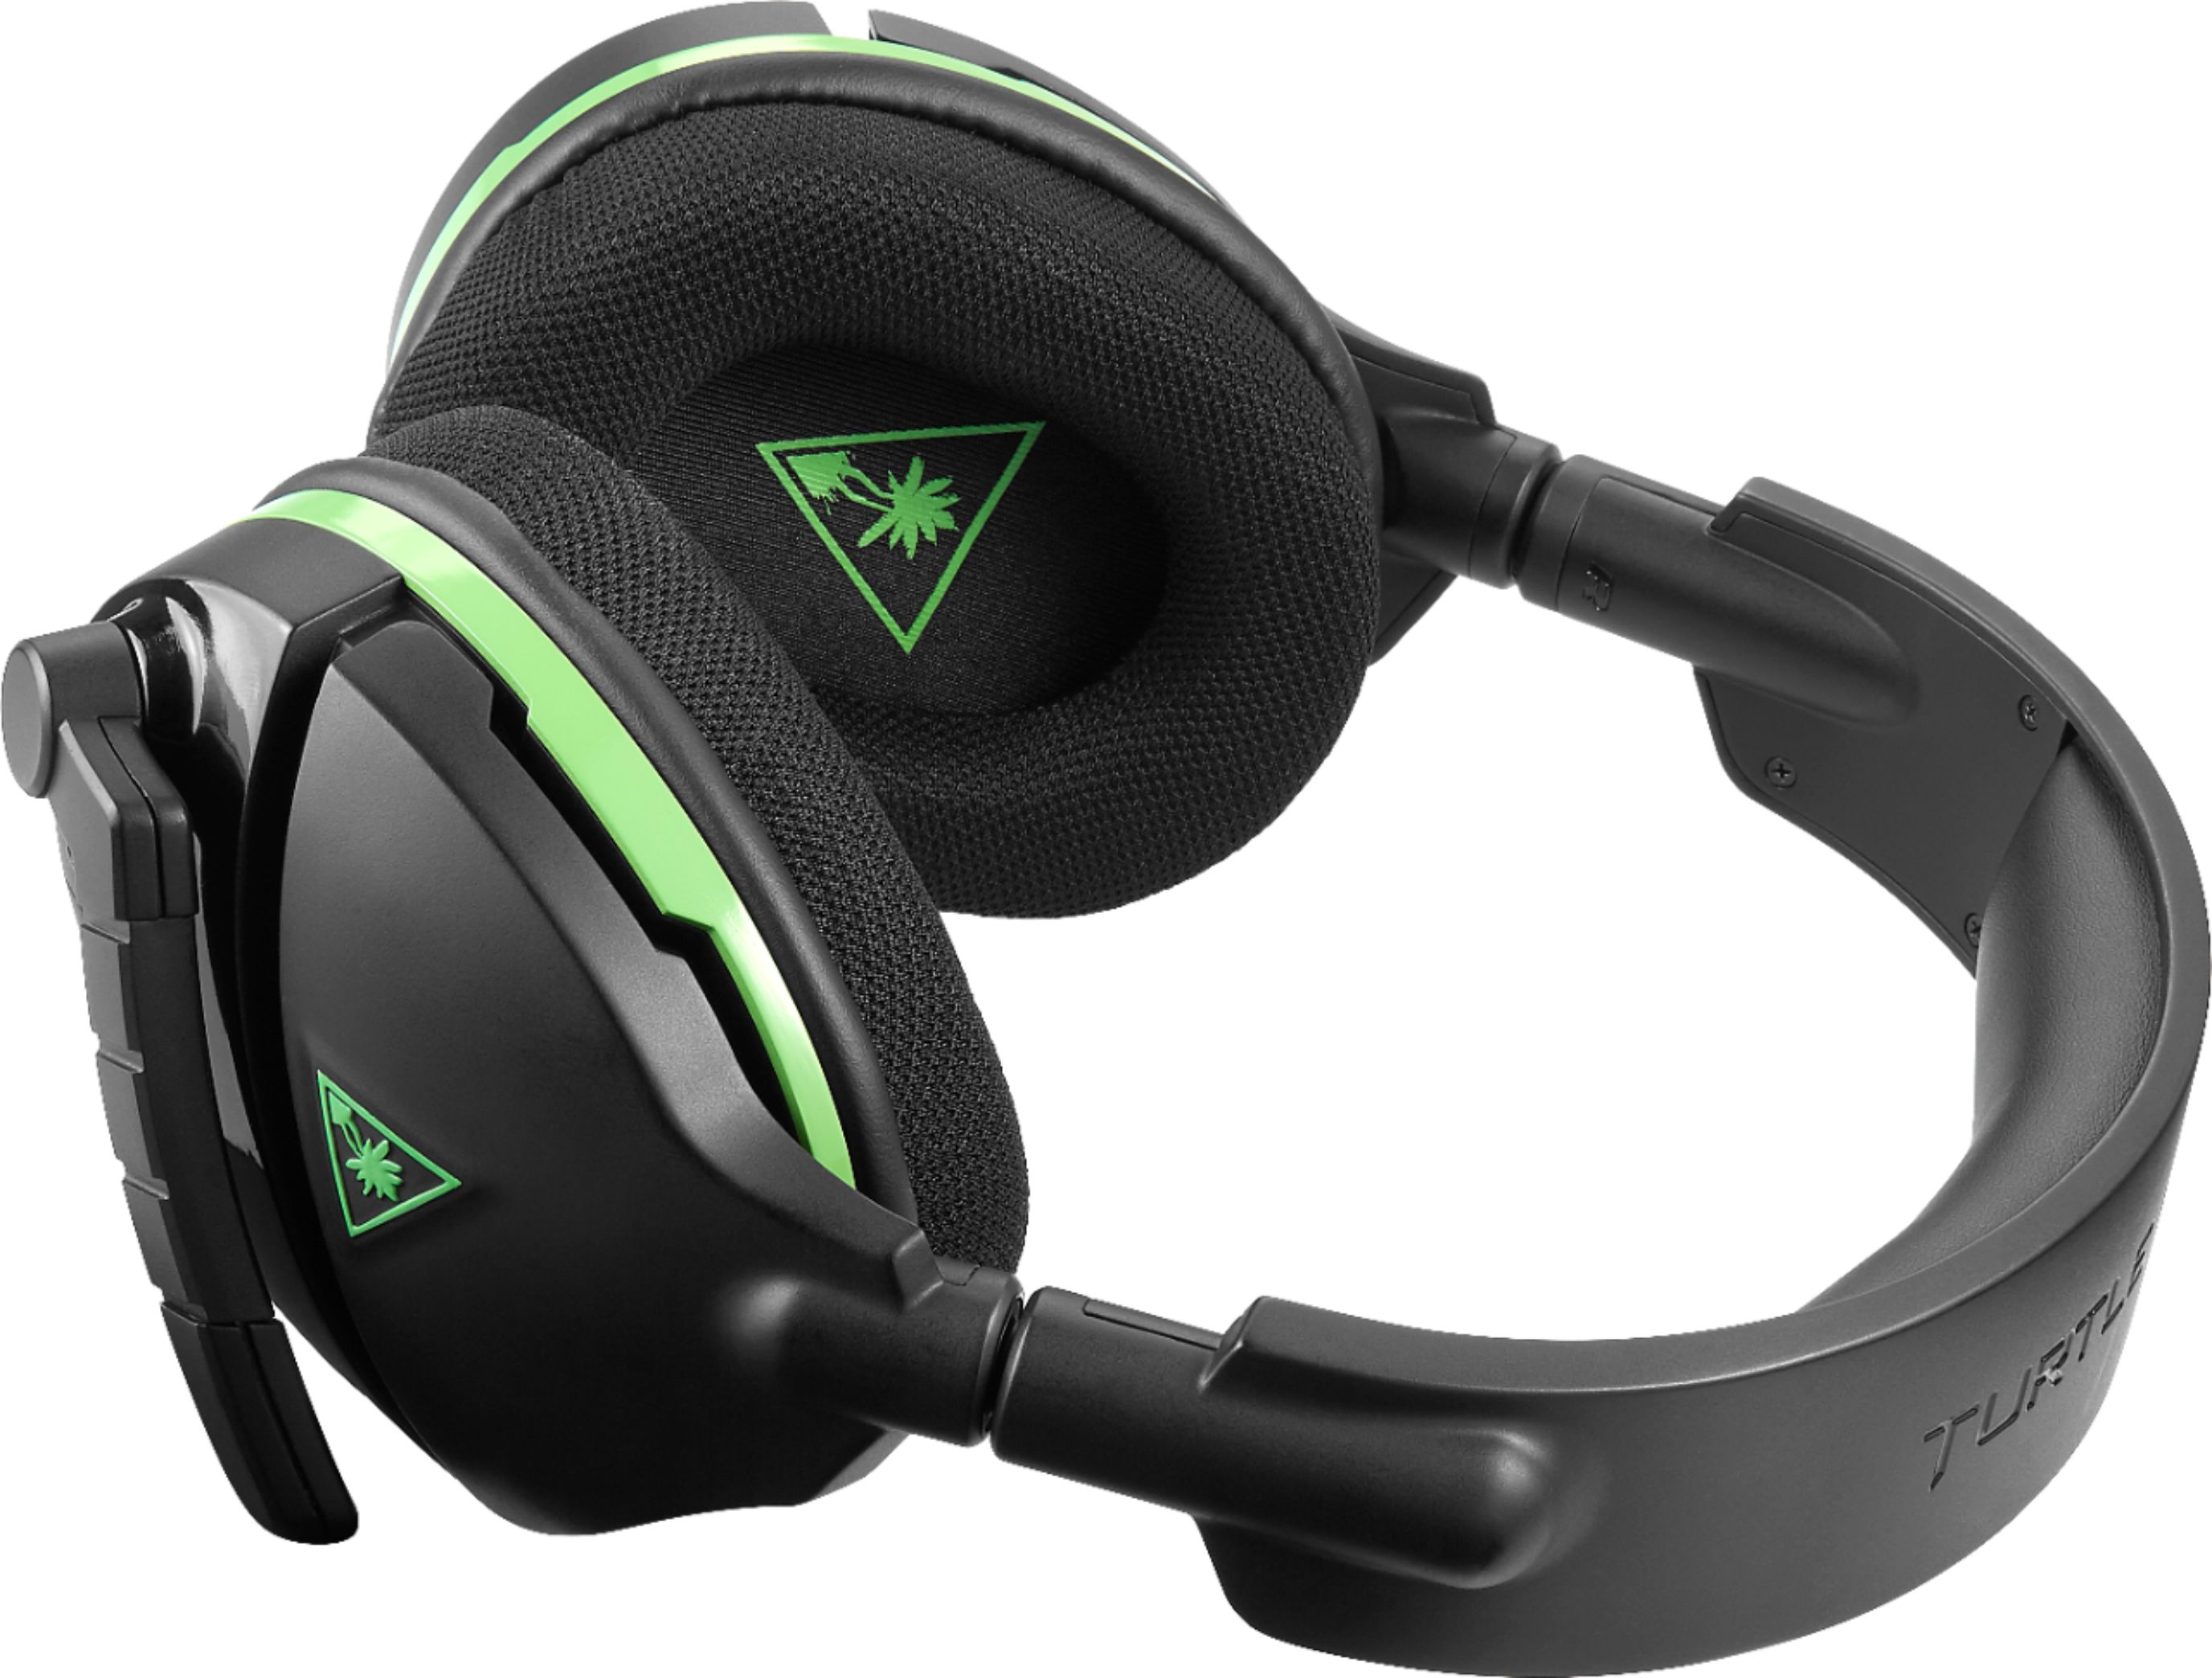 stealth 600 headset xbox